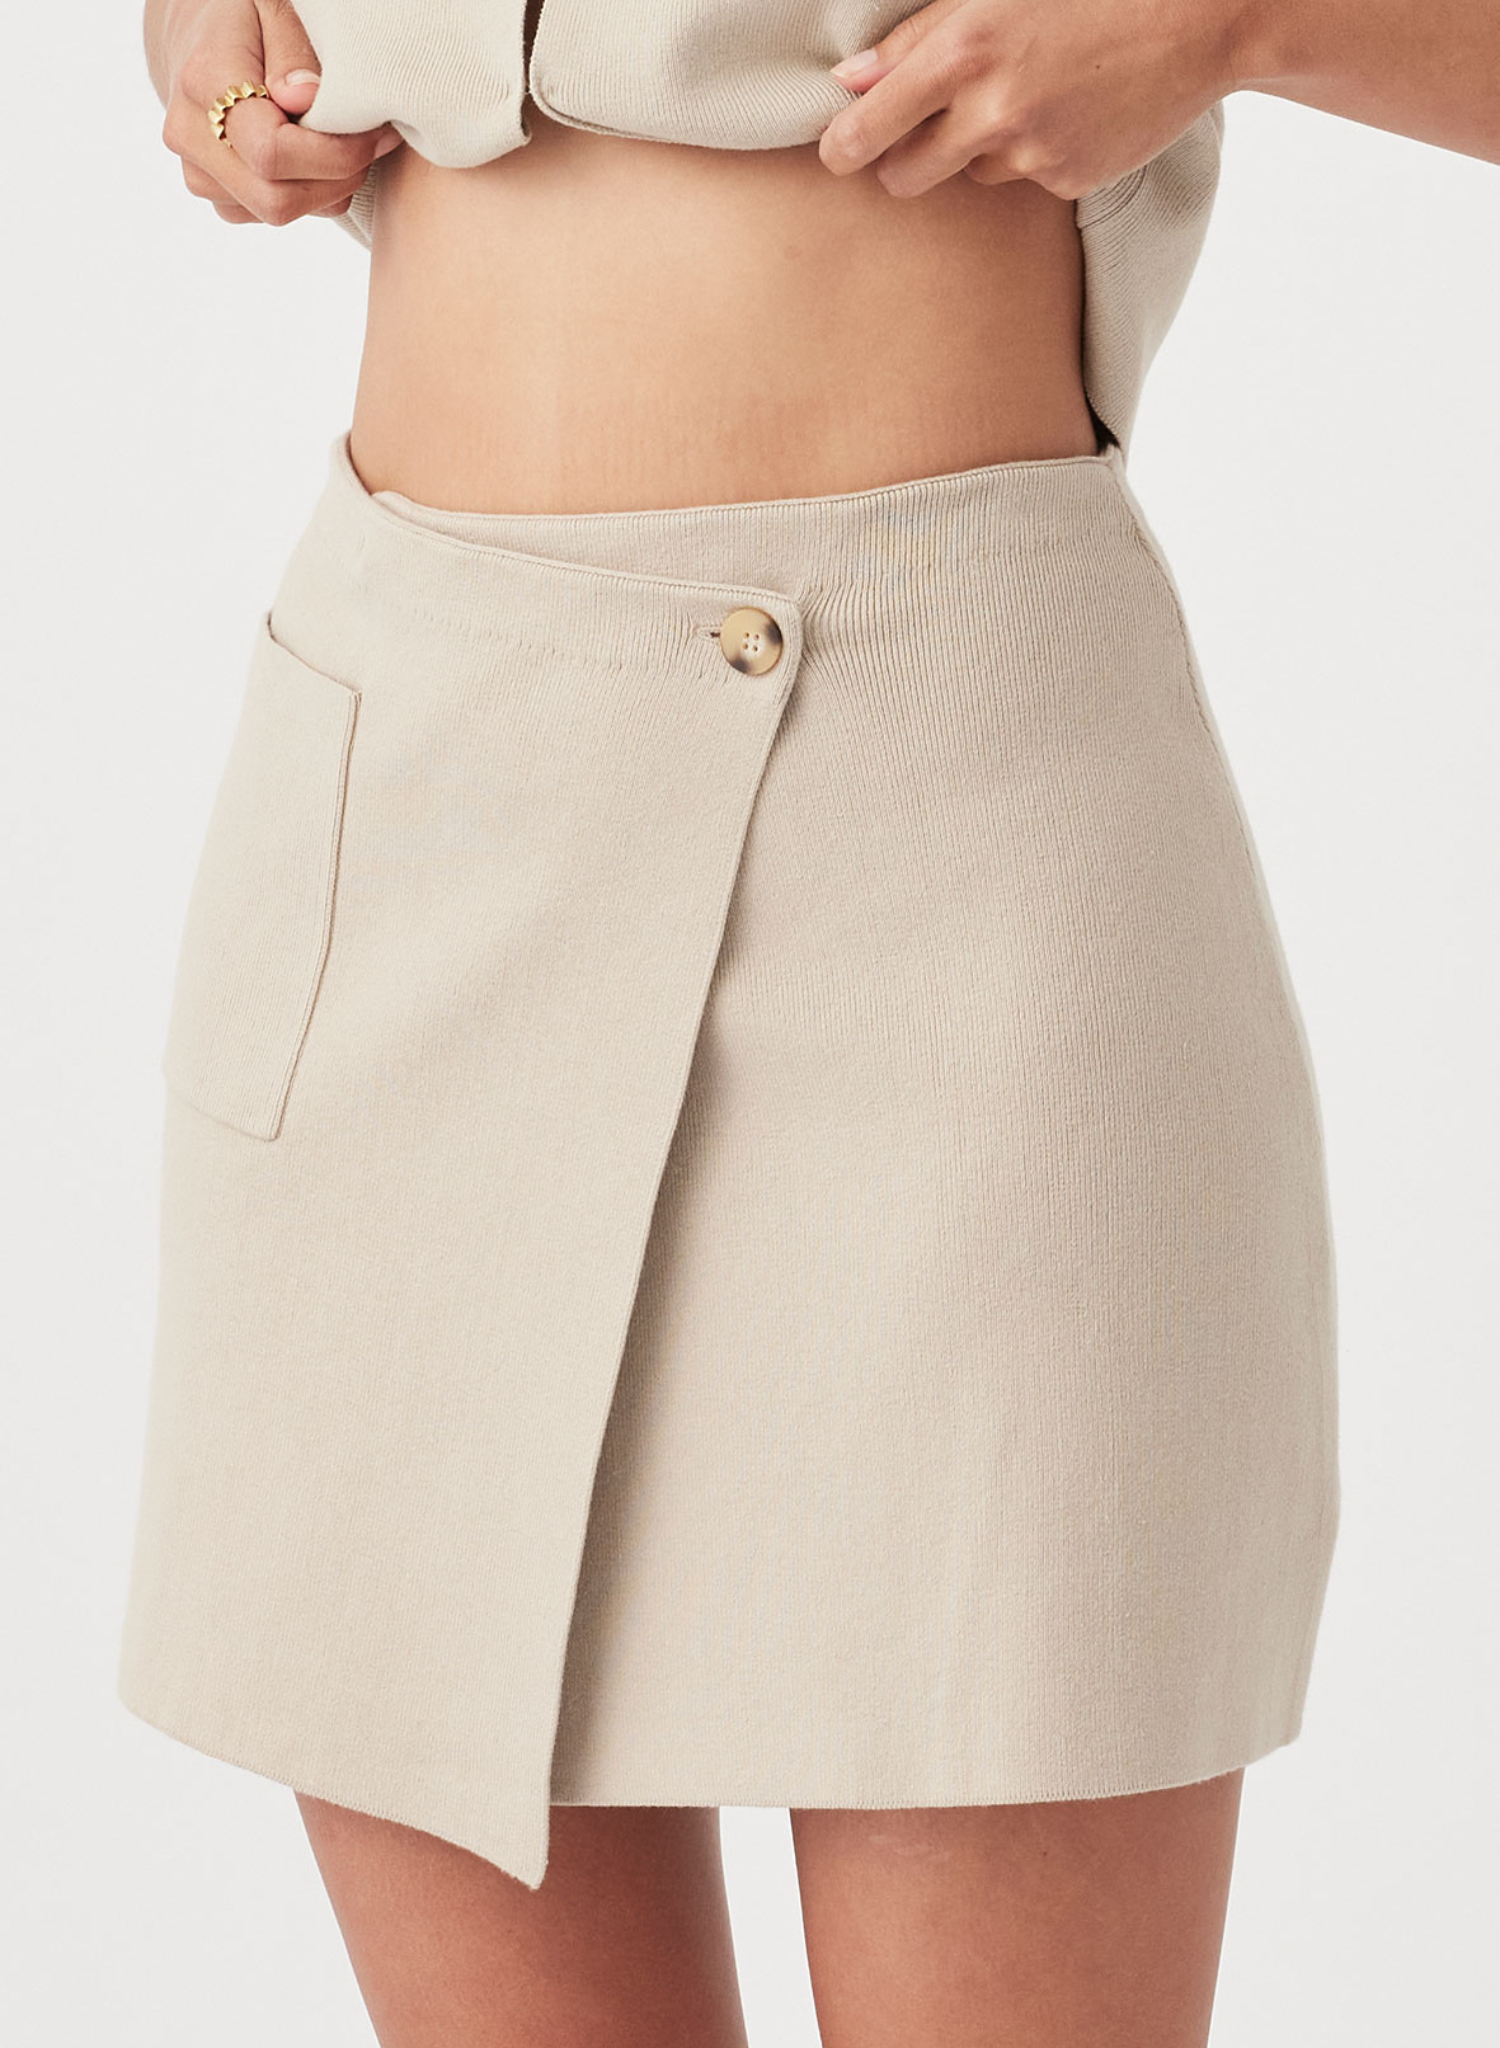 Ria Skirt in Taupe